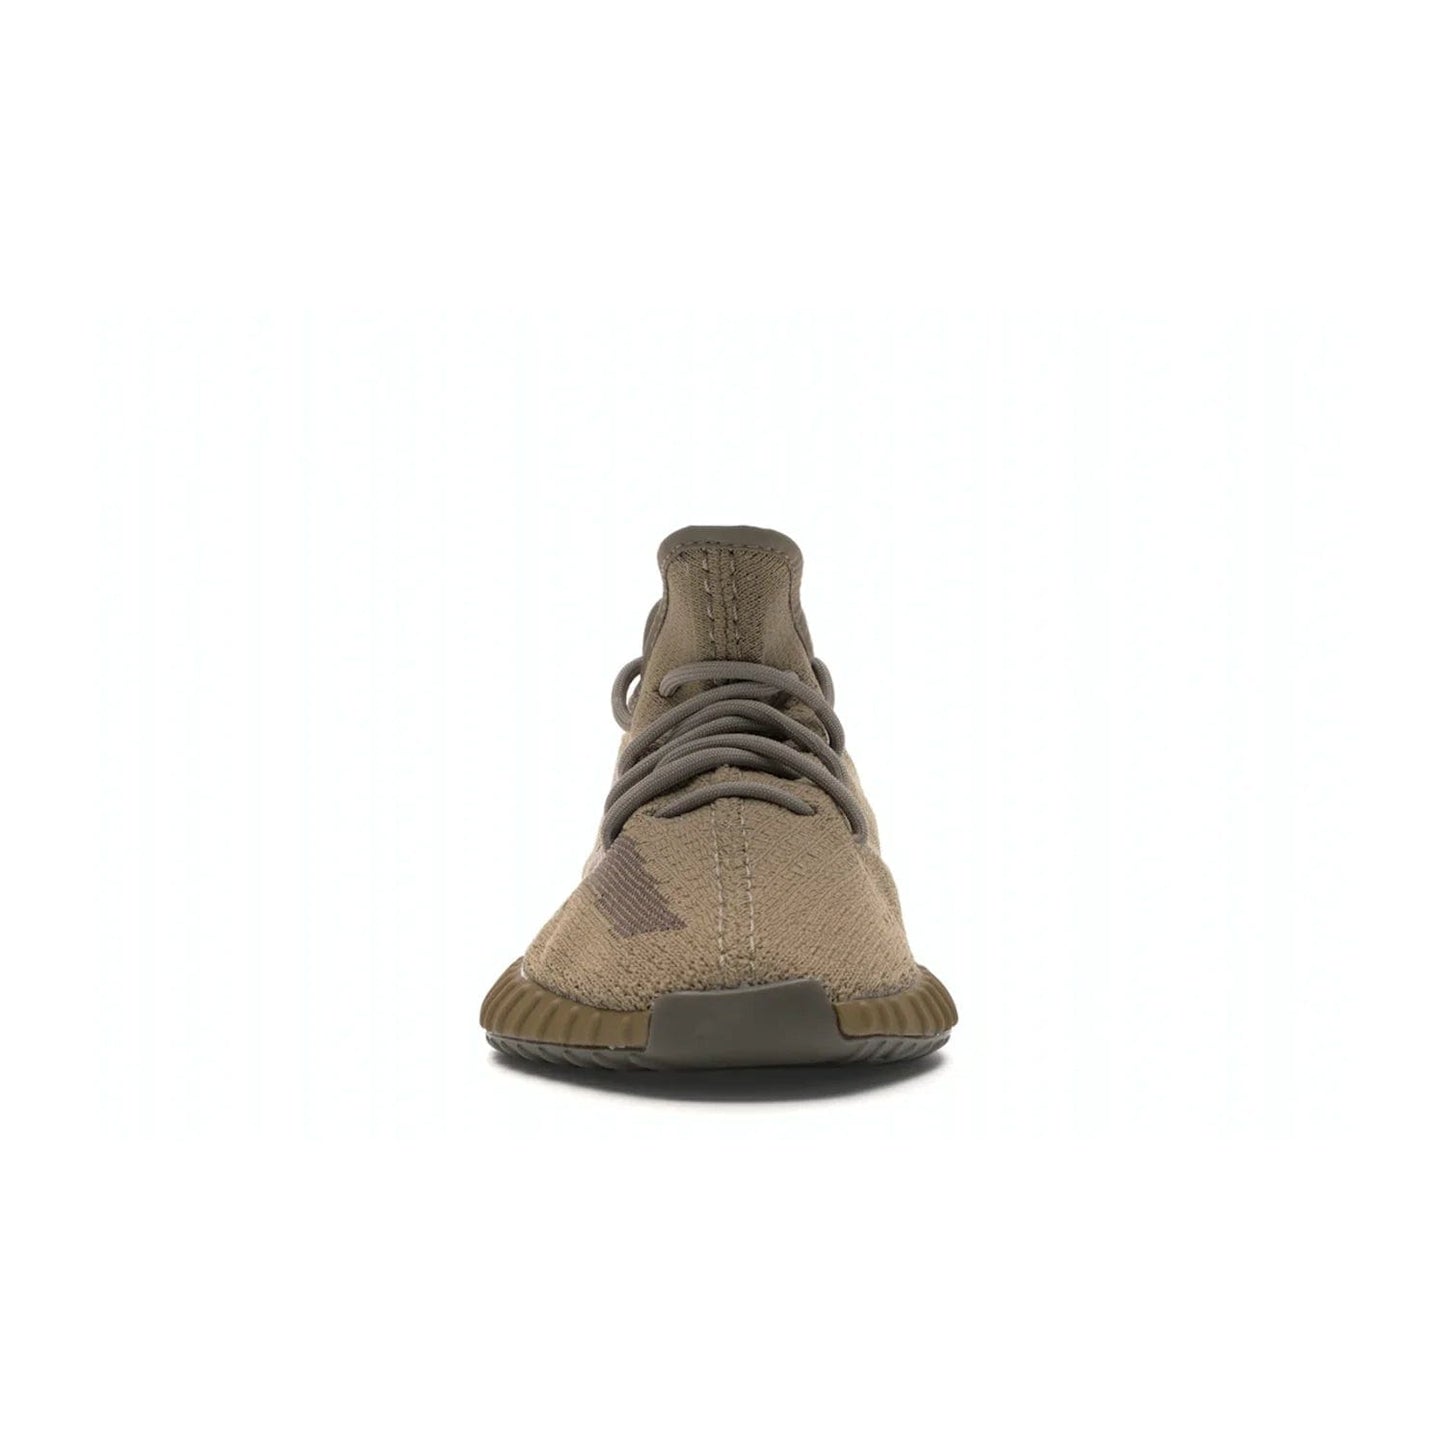 adidas Yeezy Boost 350 V2 Earth - Image 10 - Only at www.BallersClubKickz.com - Abstract style with the adidas Yeezy Boost 350 V2 Earth. Crafted with mud Primeknit upper, mud Boost and interior, and a translucent side stripe. Regional exclusive in Earth/Earth/Earth colorway, these fashionable sneakers released in February 2020. Showcase your style with the Yeezy 350 V2 Earth.